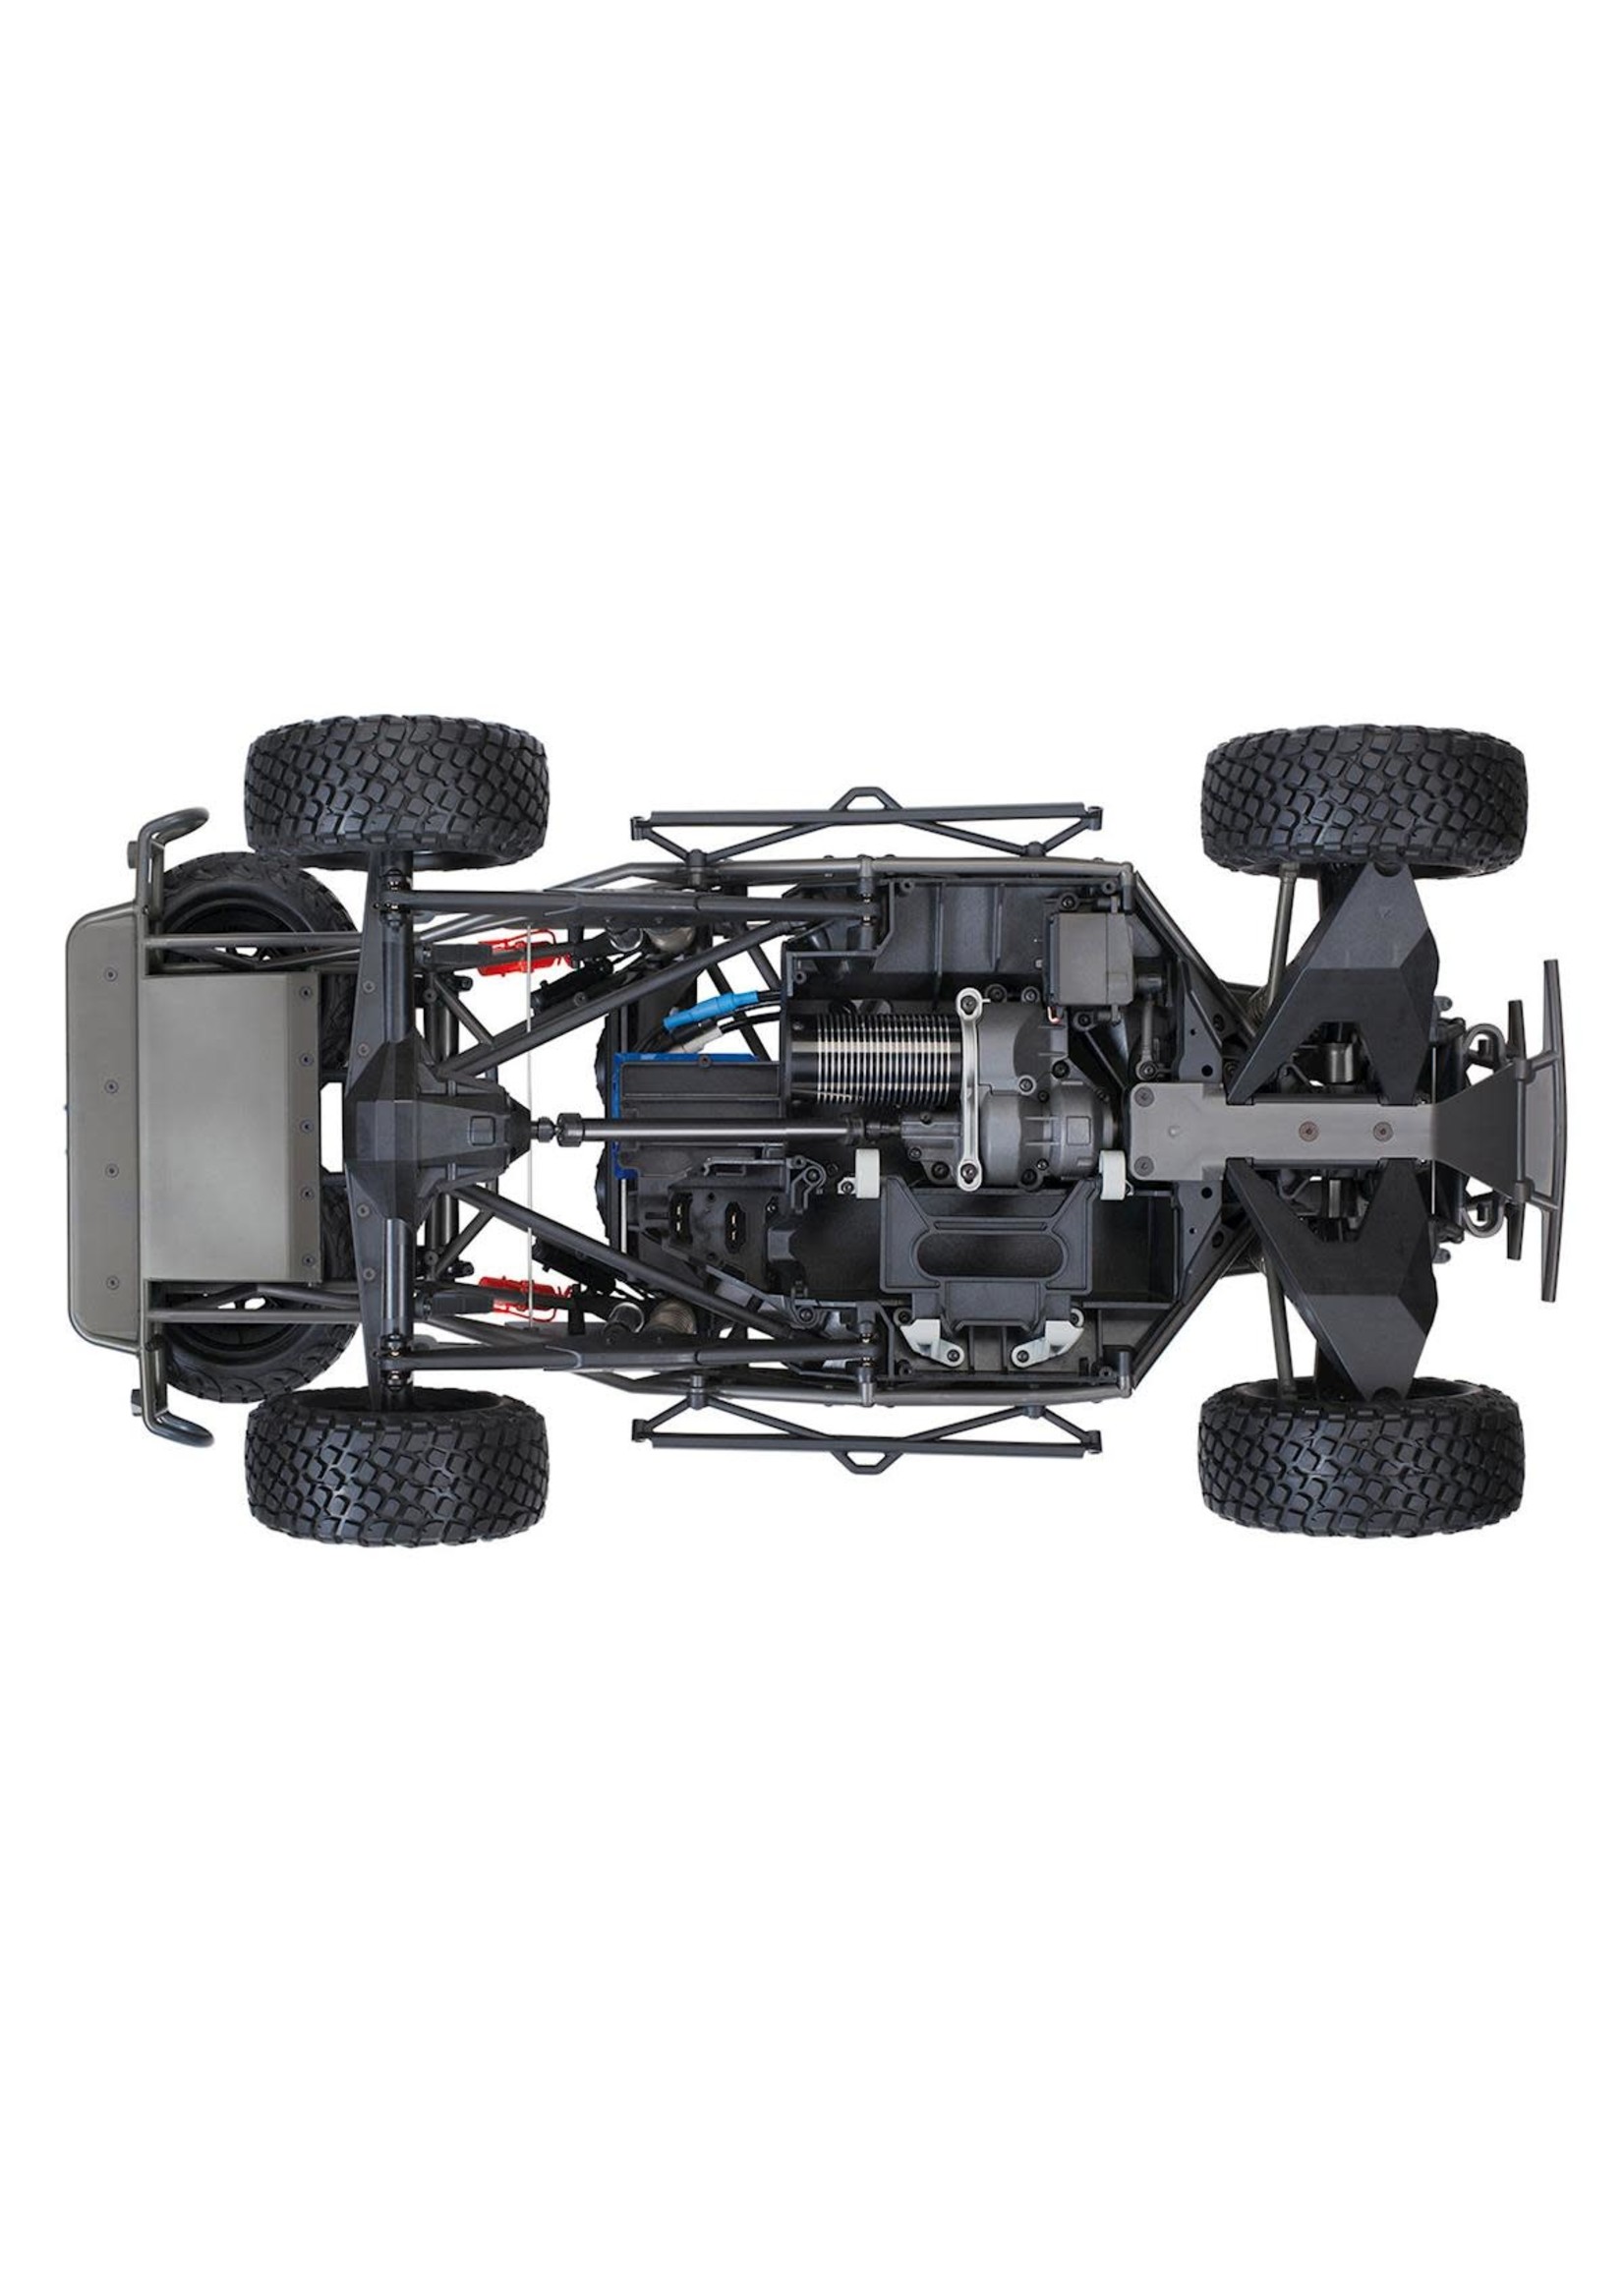 Traxxas 85086-4-TRX Unlimited Desert Racer : 4WD Electric Race Truck with TQi Traxxas Link  Enabled 2.4GHz Radio System and Traxxas Stability Management (TSM)